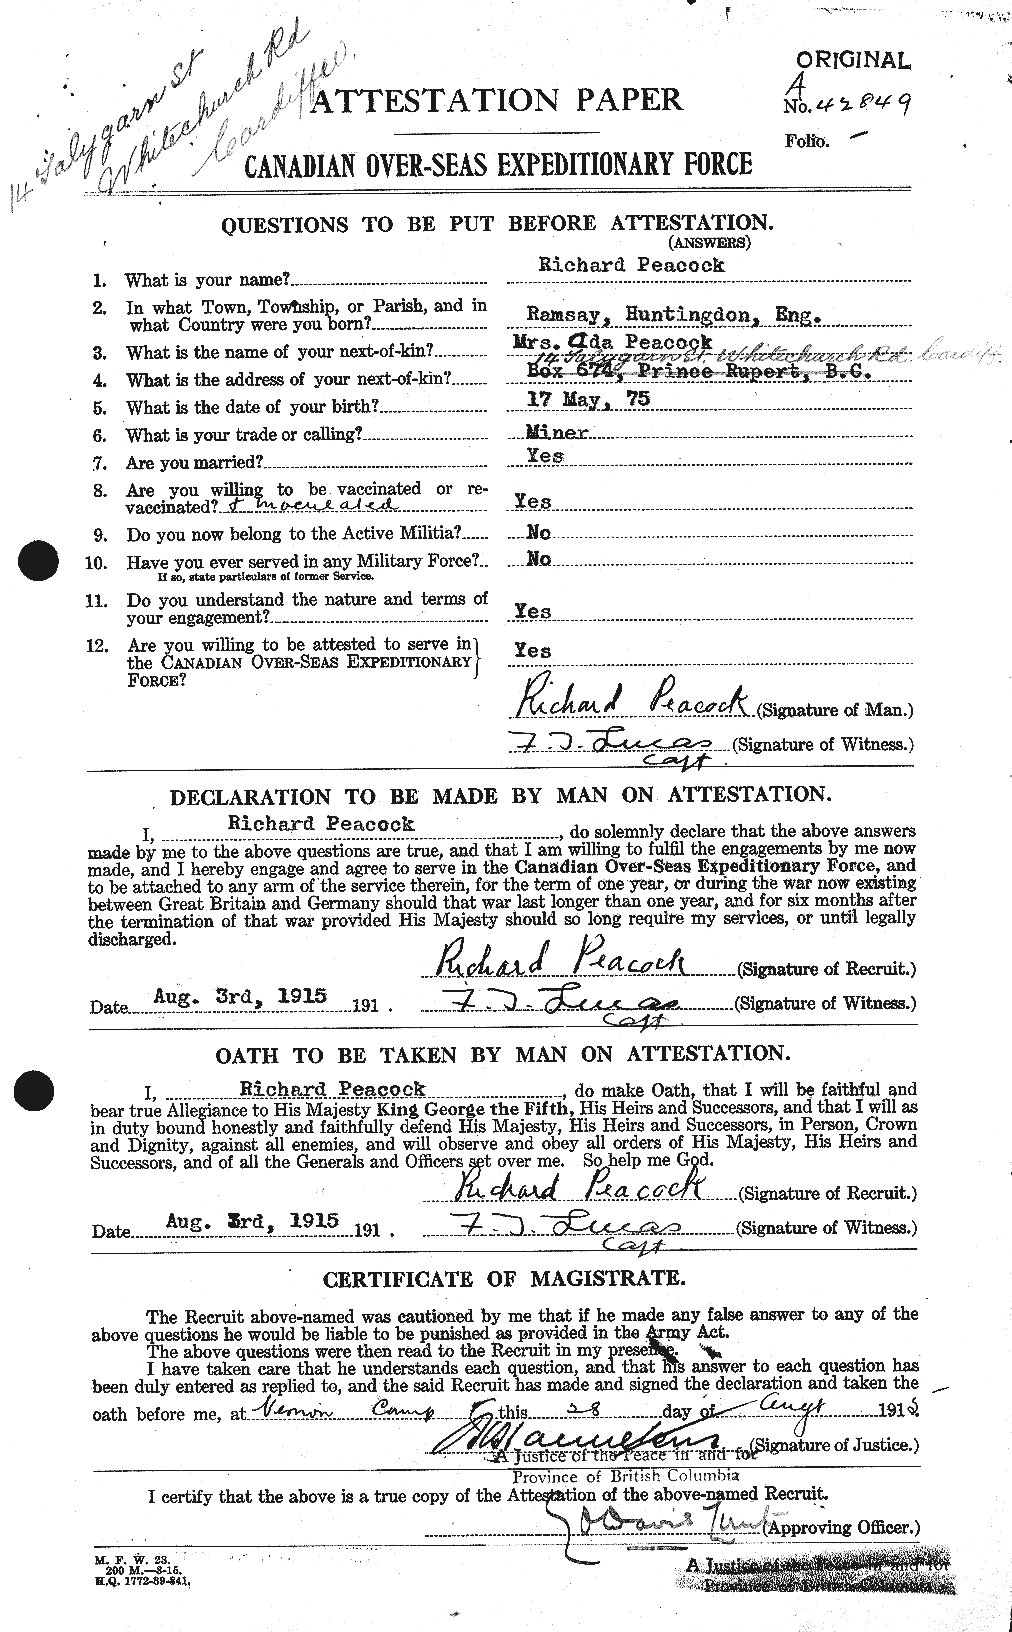 Personnel Records of the First World War - CEF 570398a